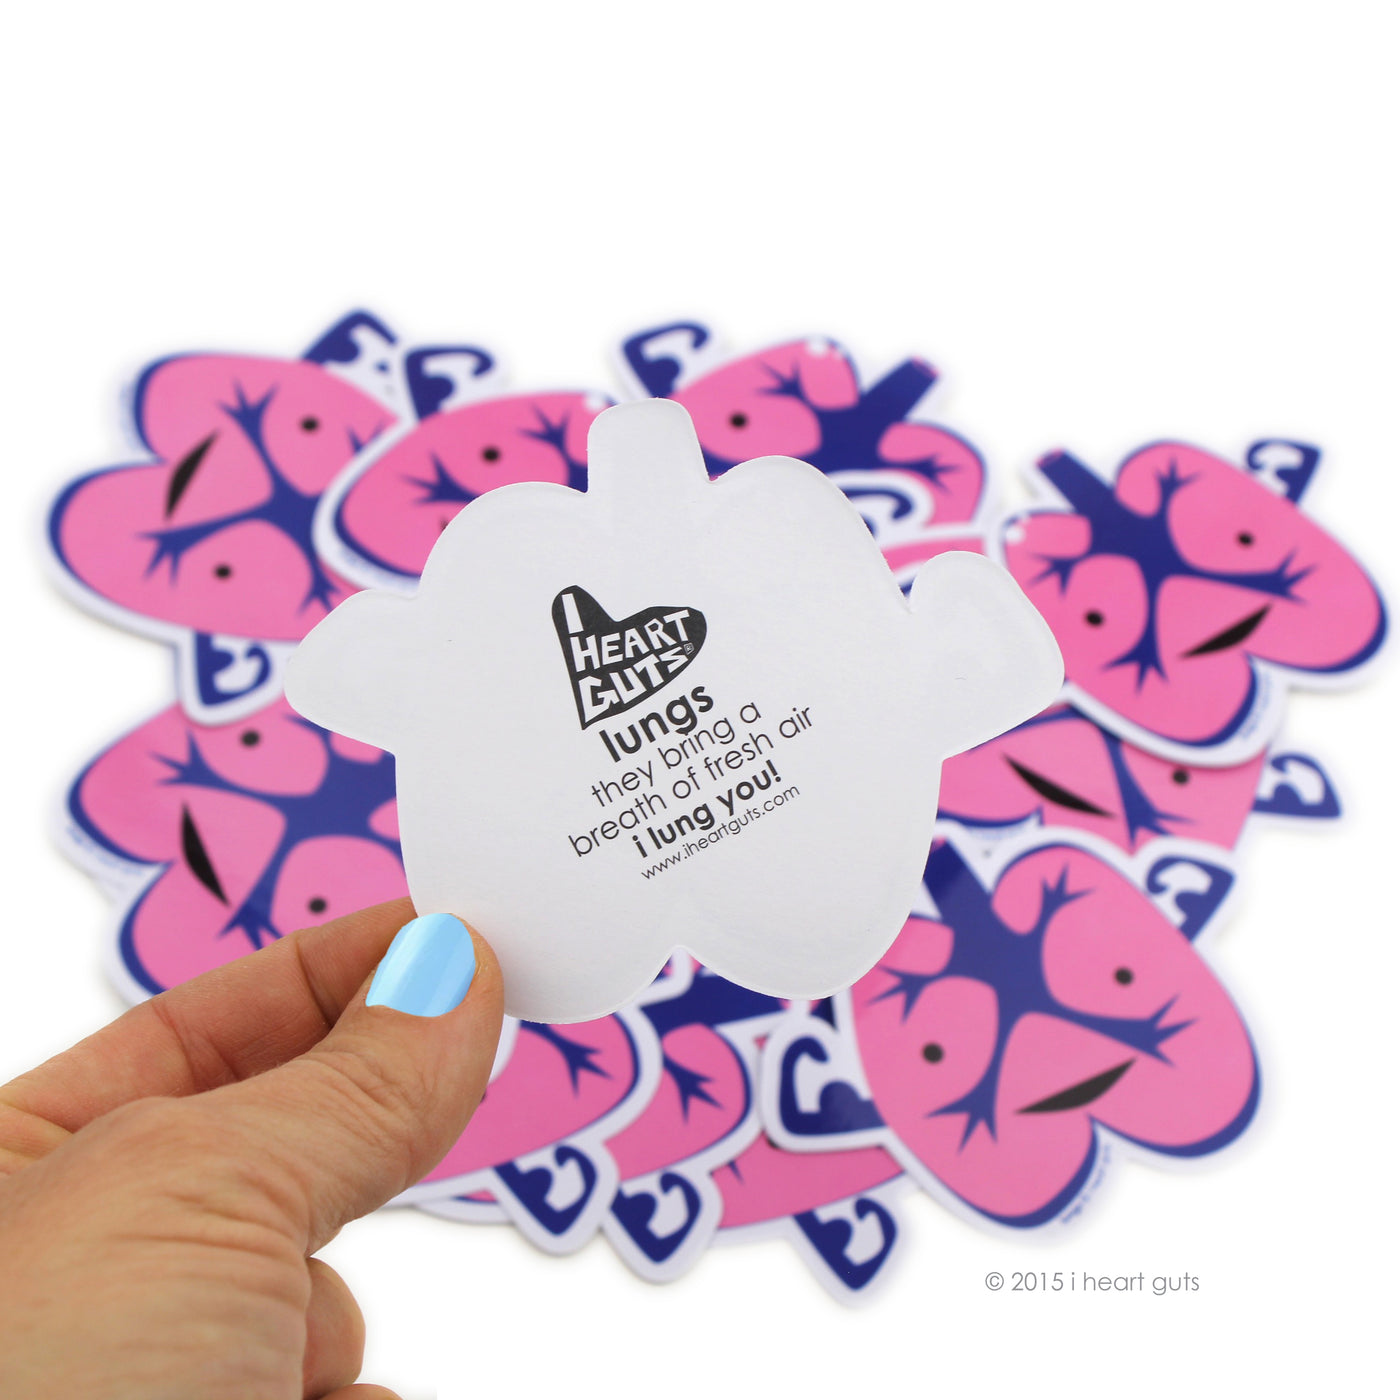 Lung Stickers | Cute Lung Stickers for Asthma, Cystic Fibrosis, COPD, Transplant